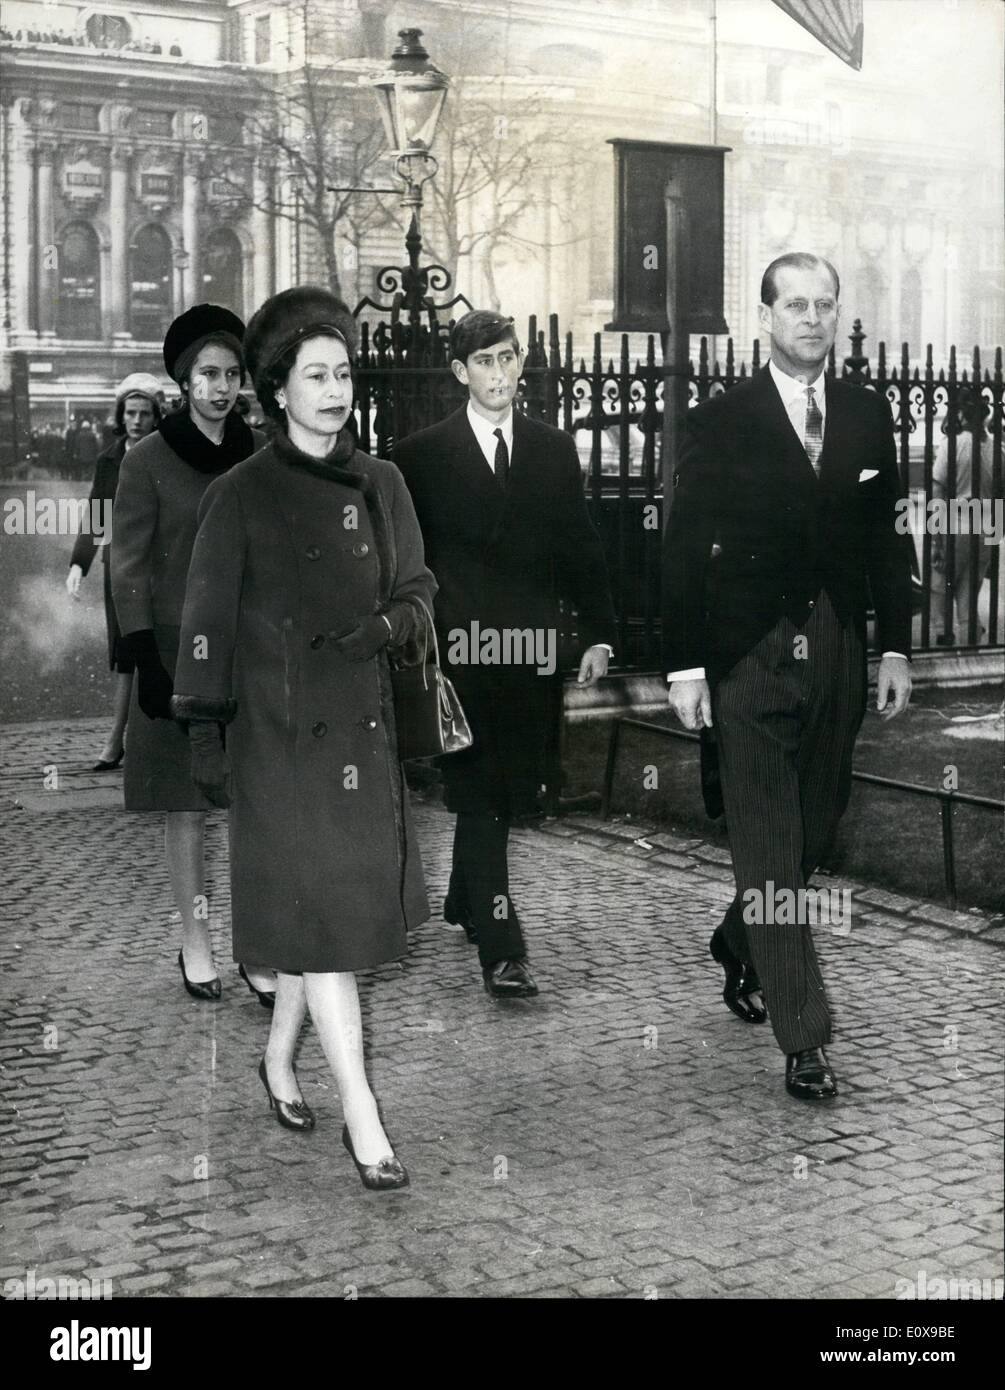 Dec. 12, 1965 - Queen Attends 900th. Anniversary Service At the Abbey: H.M. The Queen today attended the inaugural service at Westminster Abbey for the celebration commemoration the 900th. Anniversary of the abbey's consecration. Other members of the Royal Family also attended. Photo Shows H.M. The Queen With Prince Philip, Prince Charles and Princess Anne, arrive at Westminster Abbey for today's service. Stock Photo